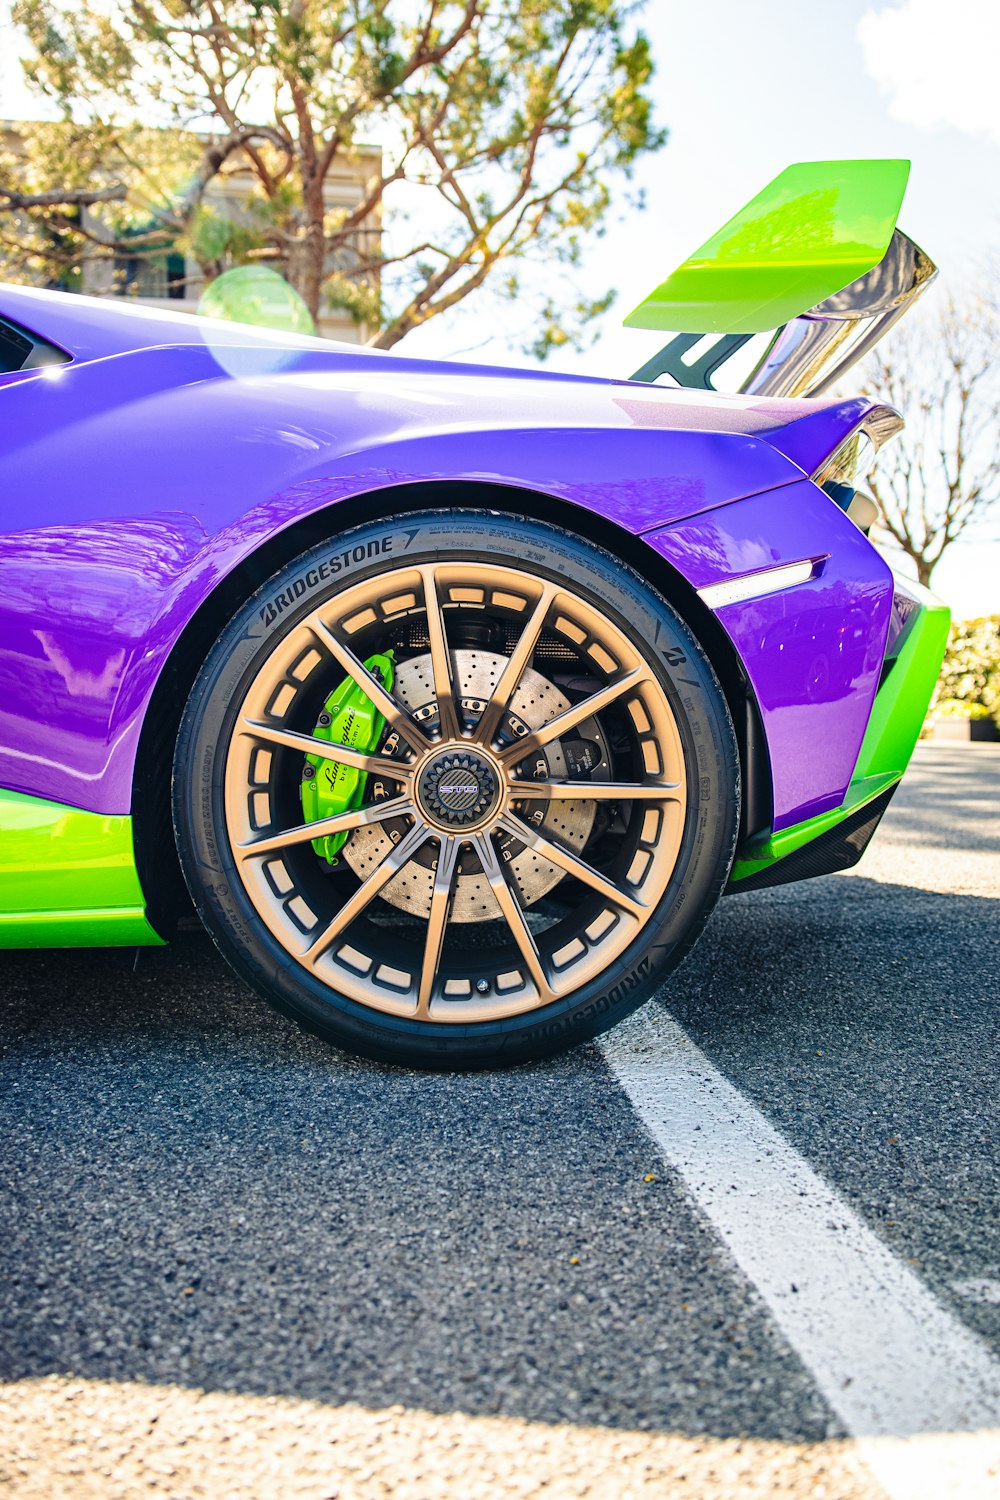 a purple and green sports car parked in a parking lot